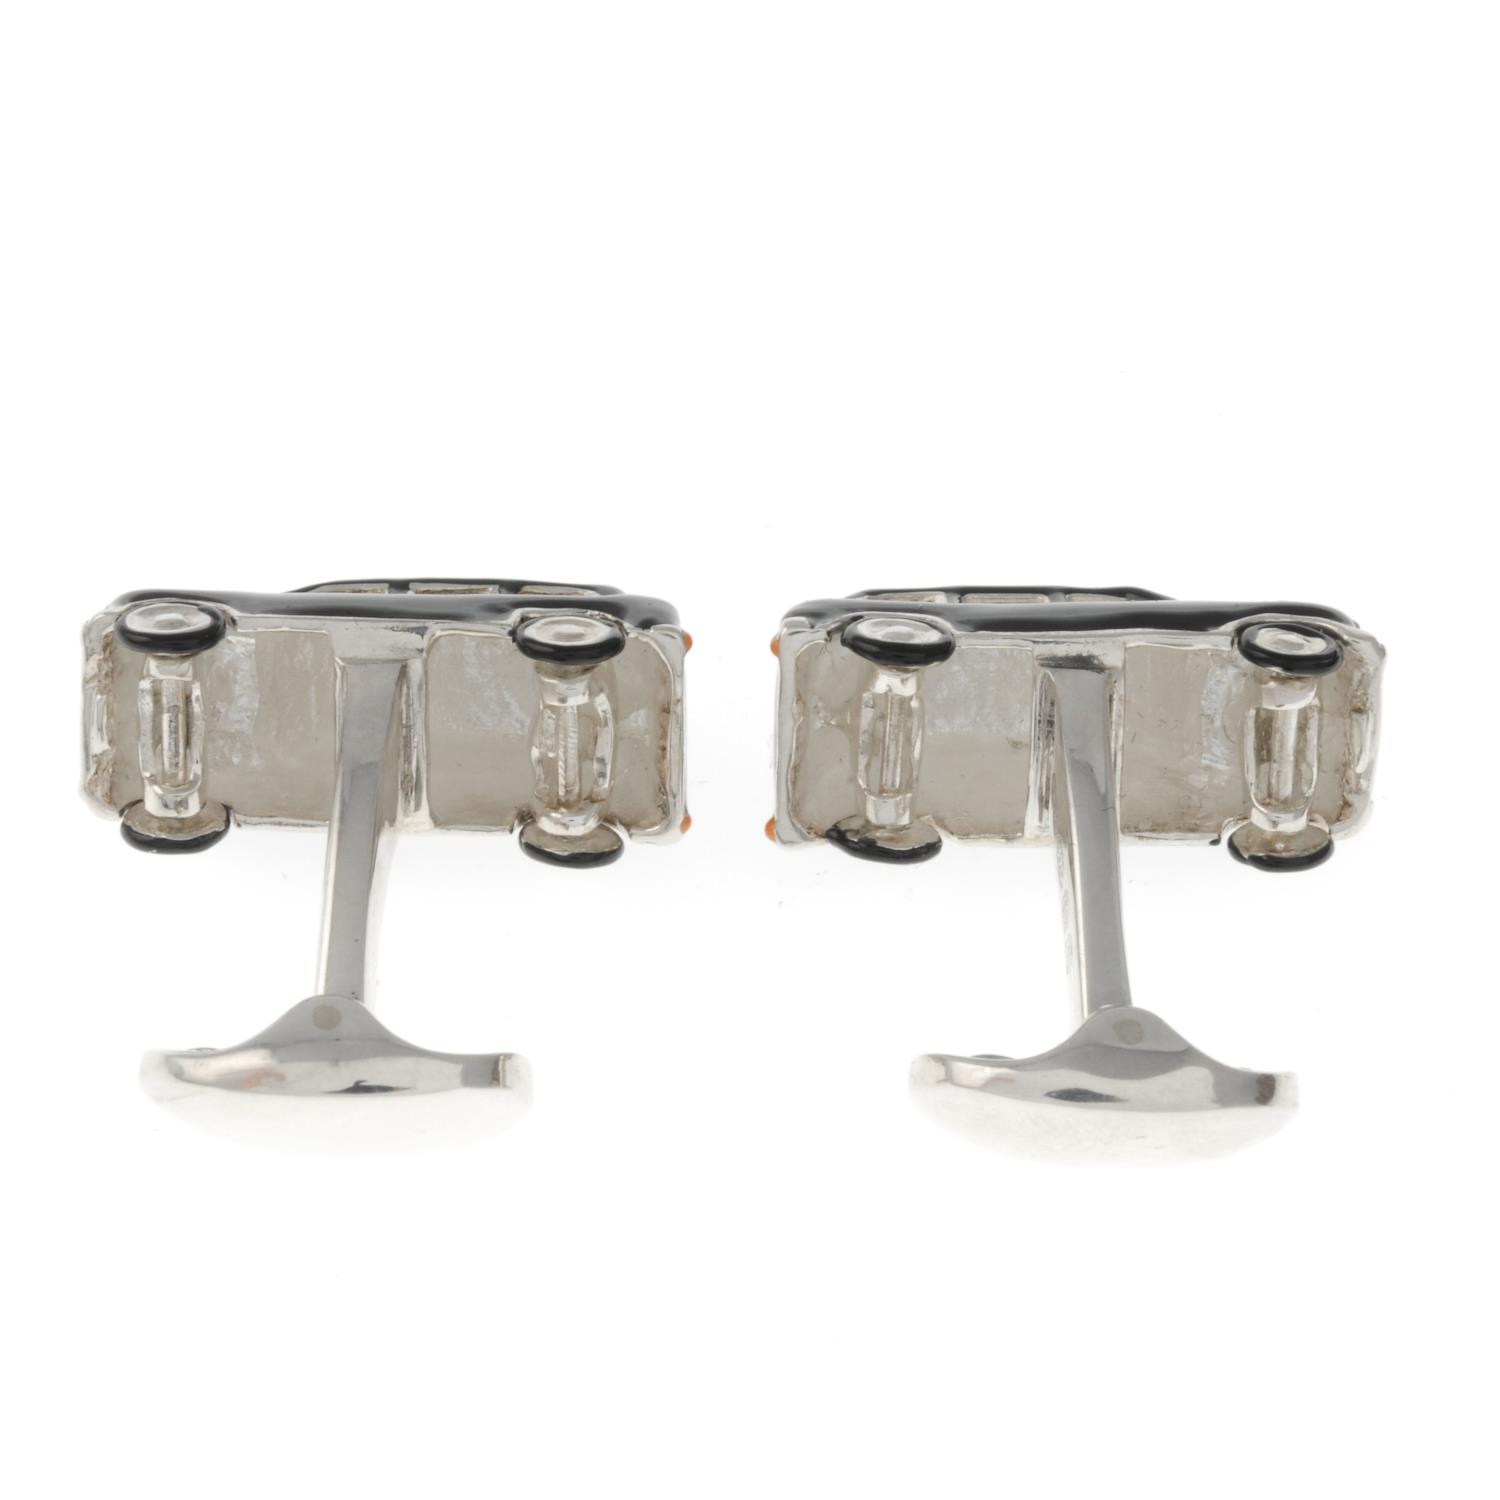 A pair of silver and enamel taxi cufflinks with rotating from wheels, - Image 3 of 3